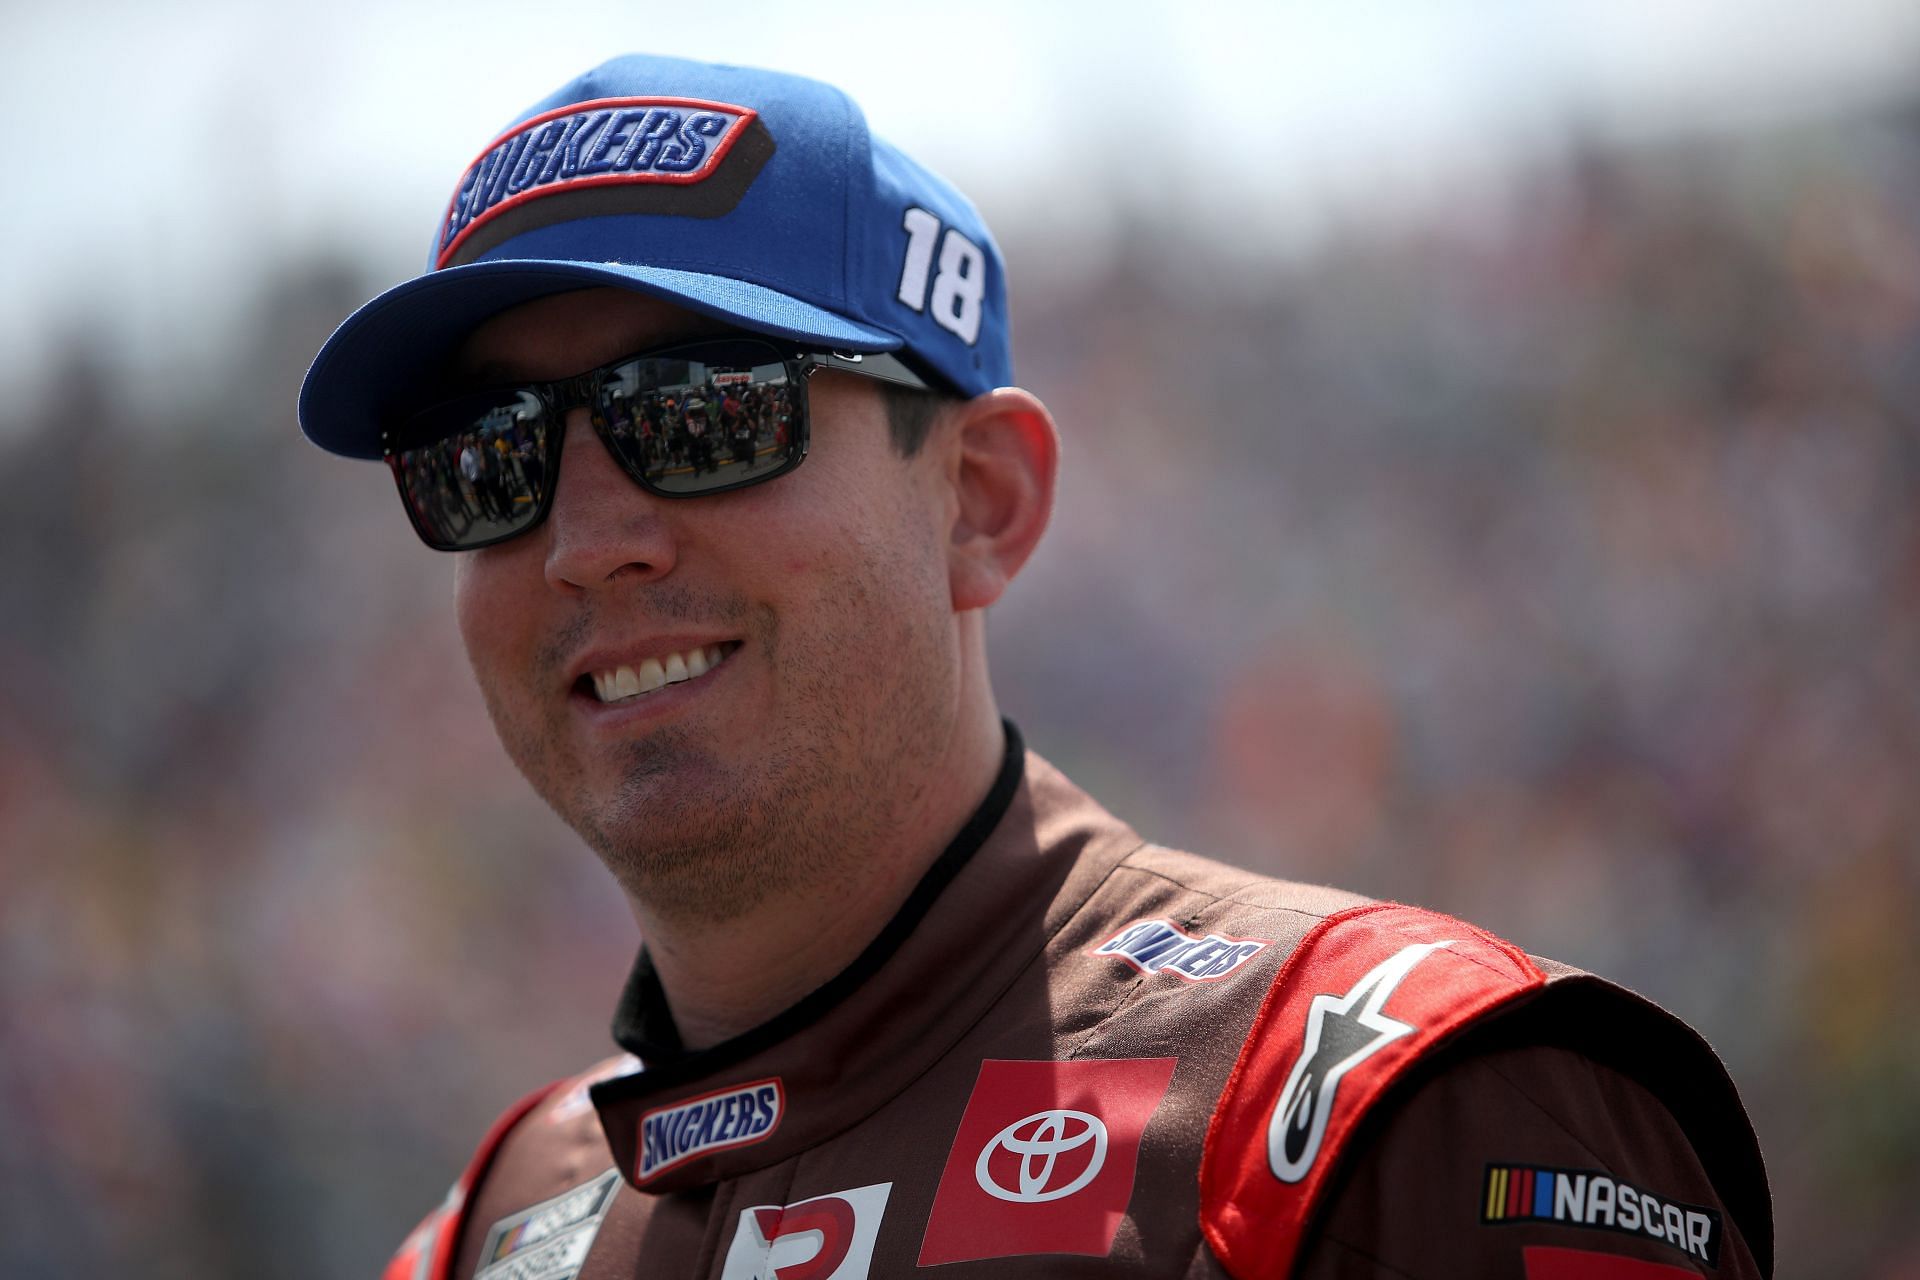 Kyle Busch waits on the grid before the NASCAR Cup Series Enjoy Illinois 300 at WWT Raceway